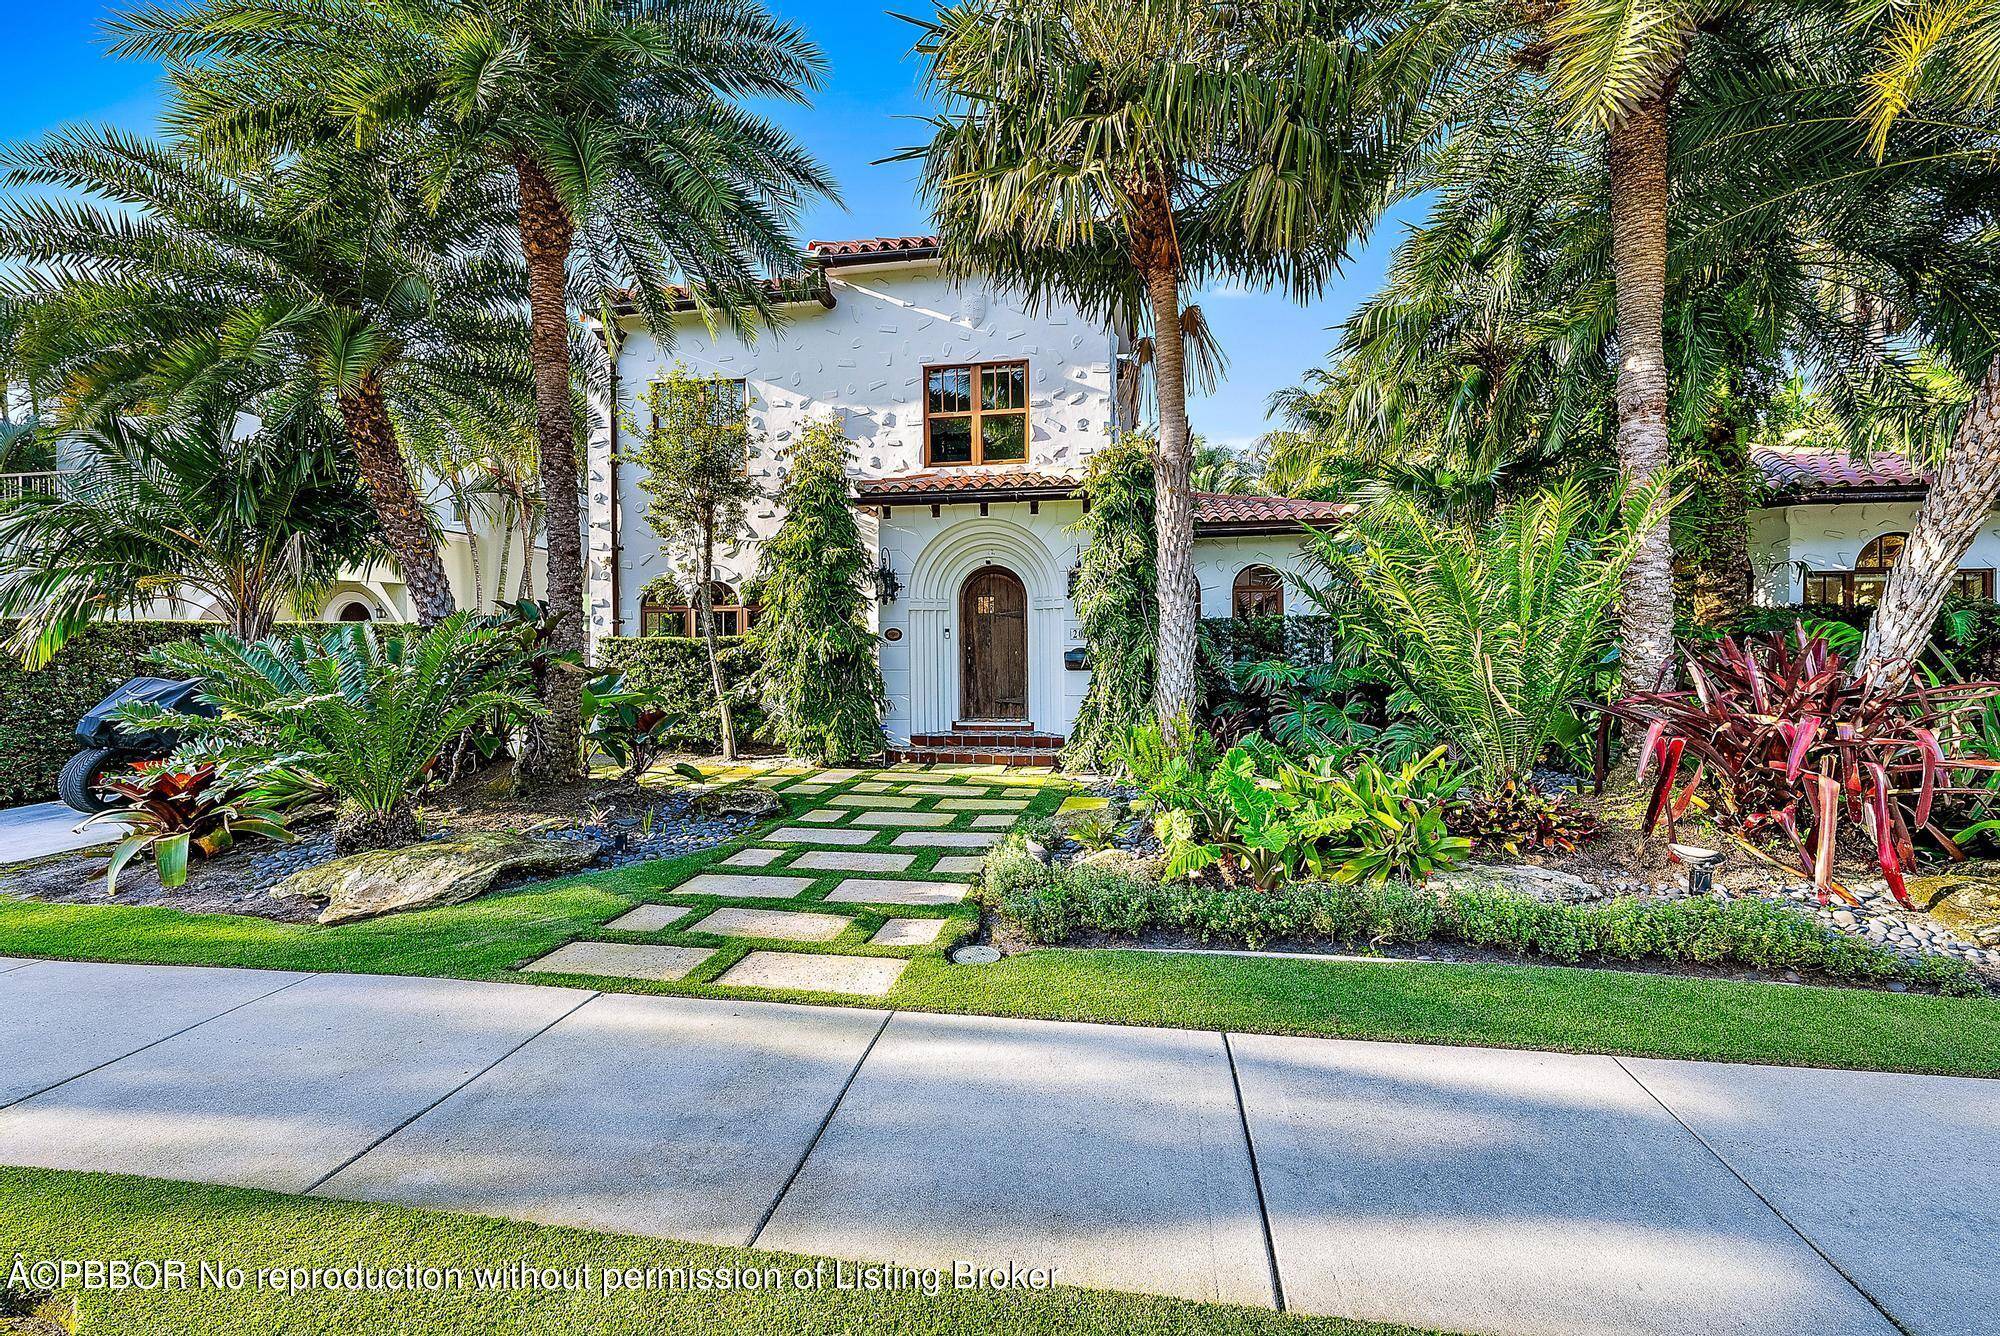 Welcome to a slice of paradise nestled in the heart of West Palm Beach.